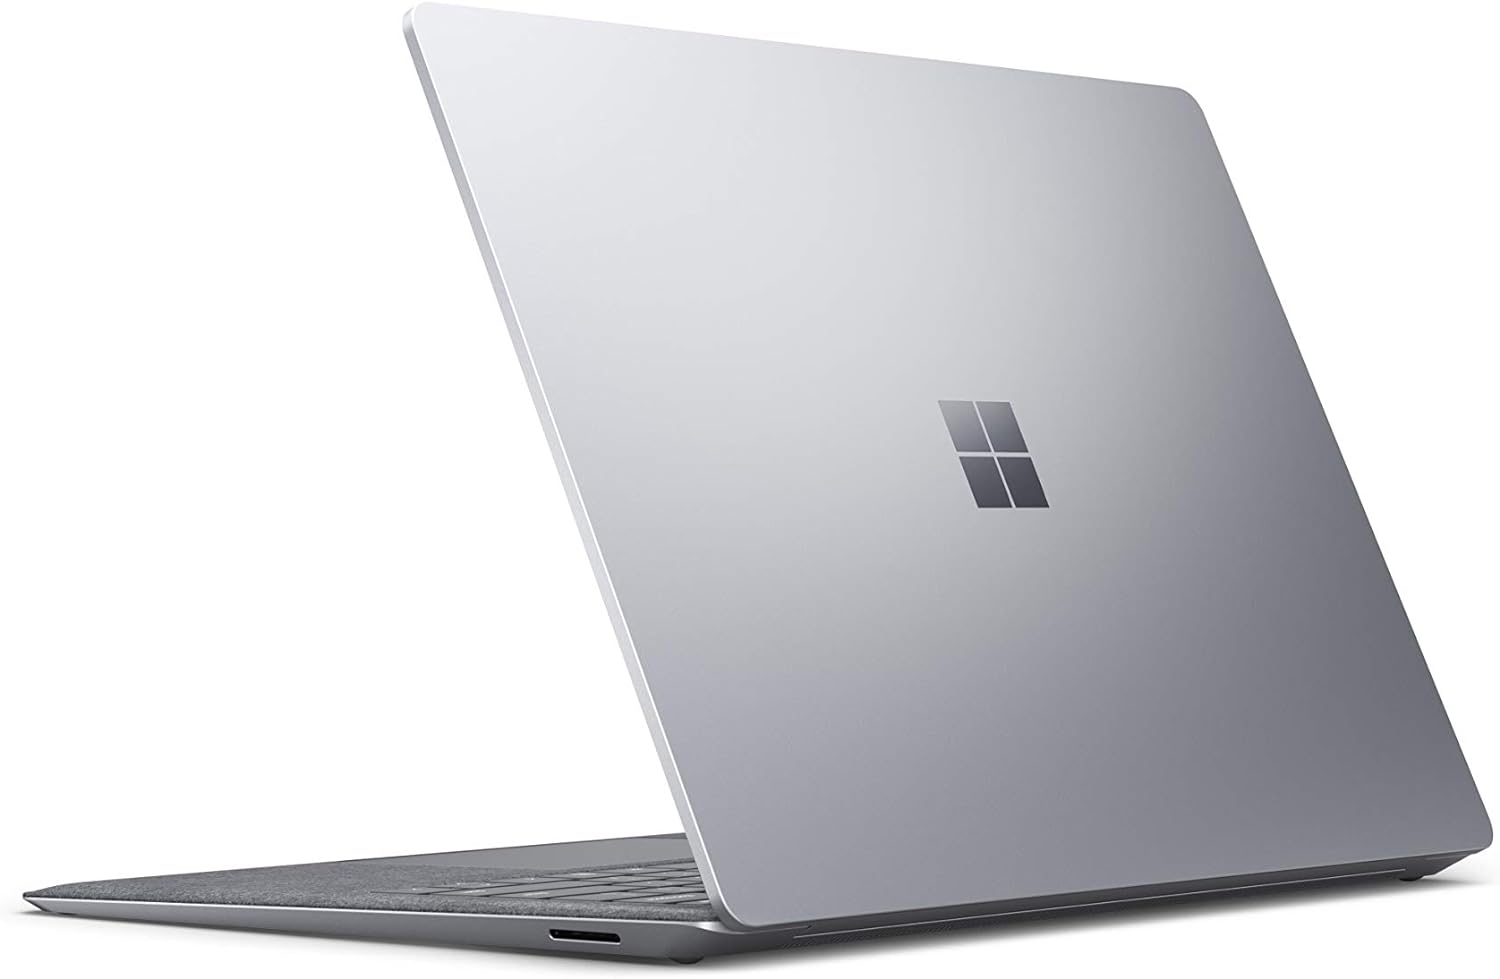 Microsoft Surface Laptop 3 256GB SSD 13.5" - All Colours - Pristine